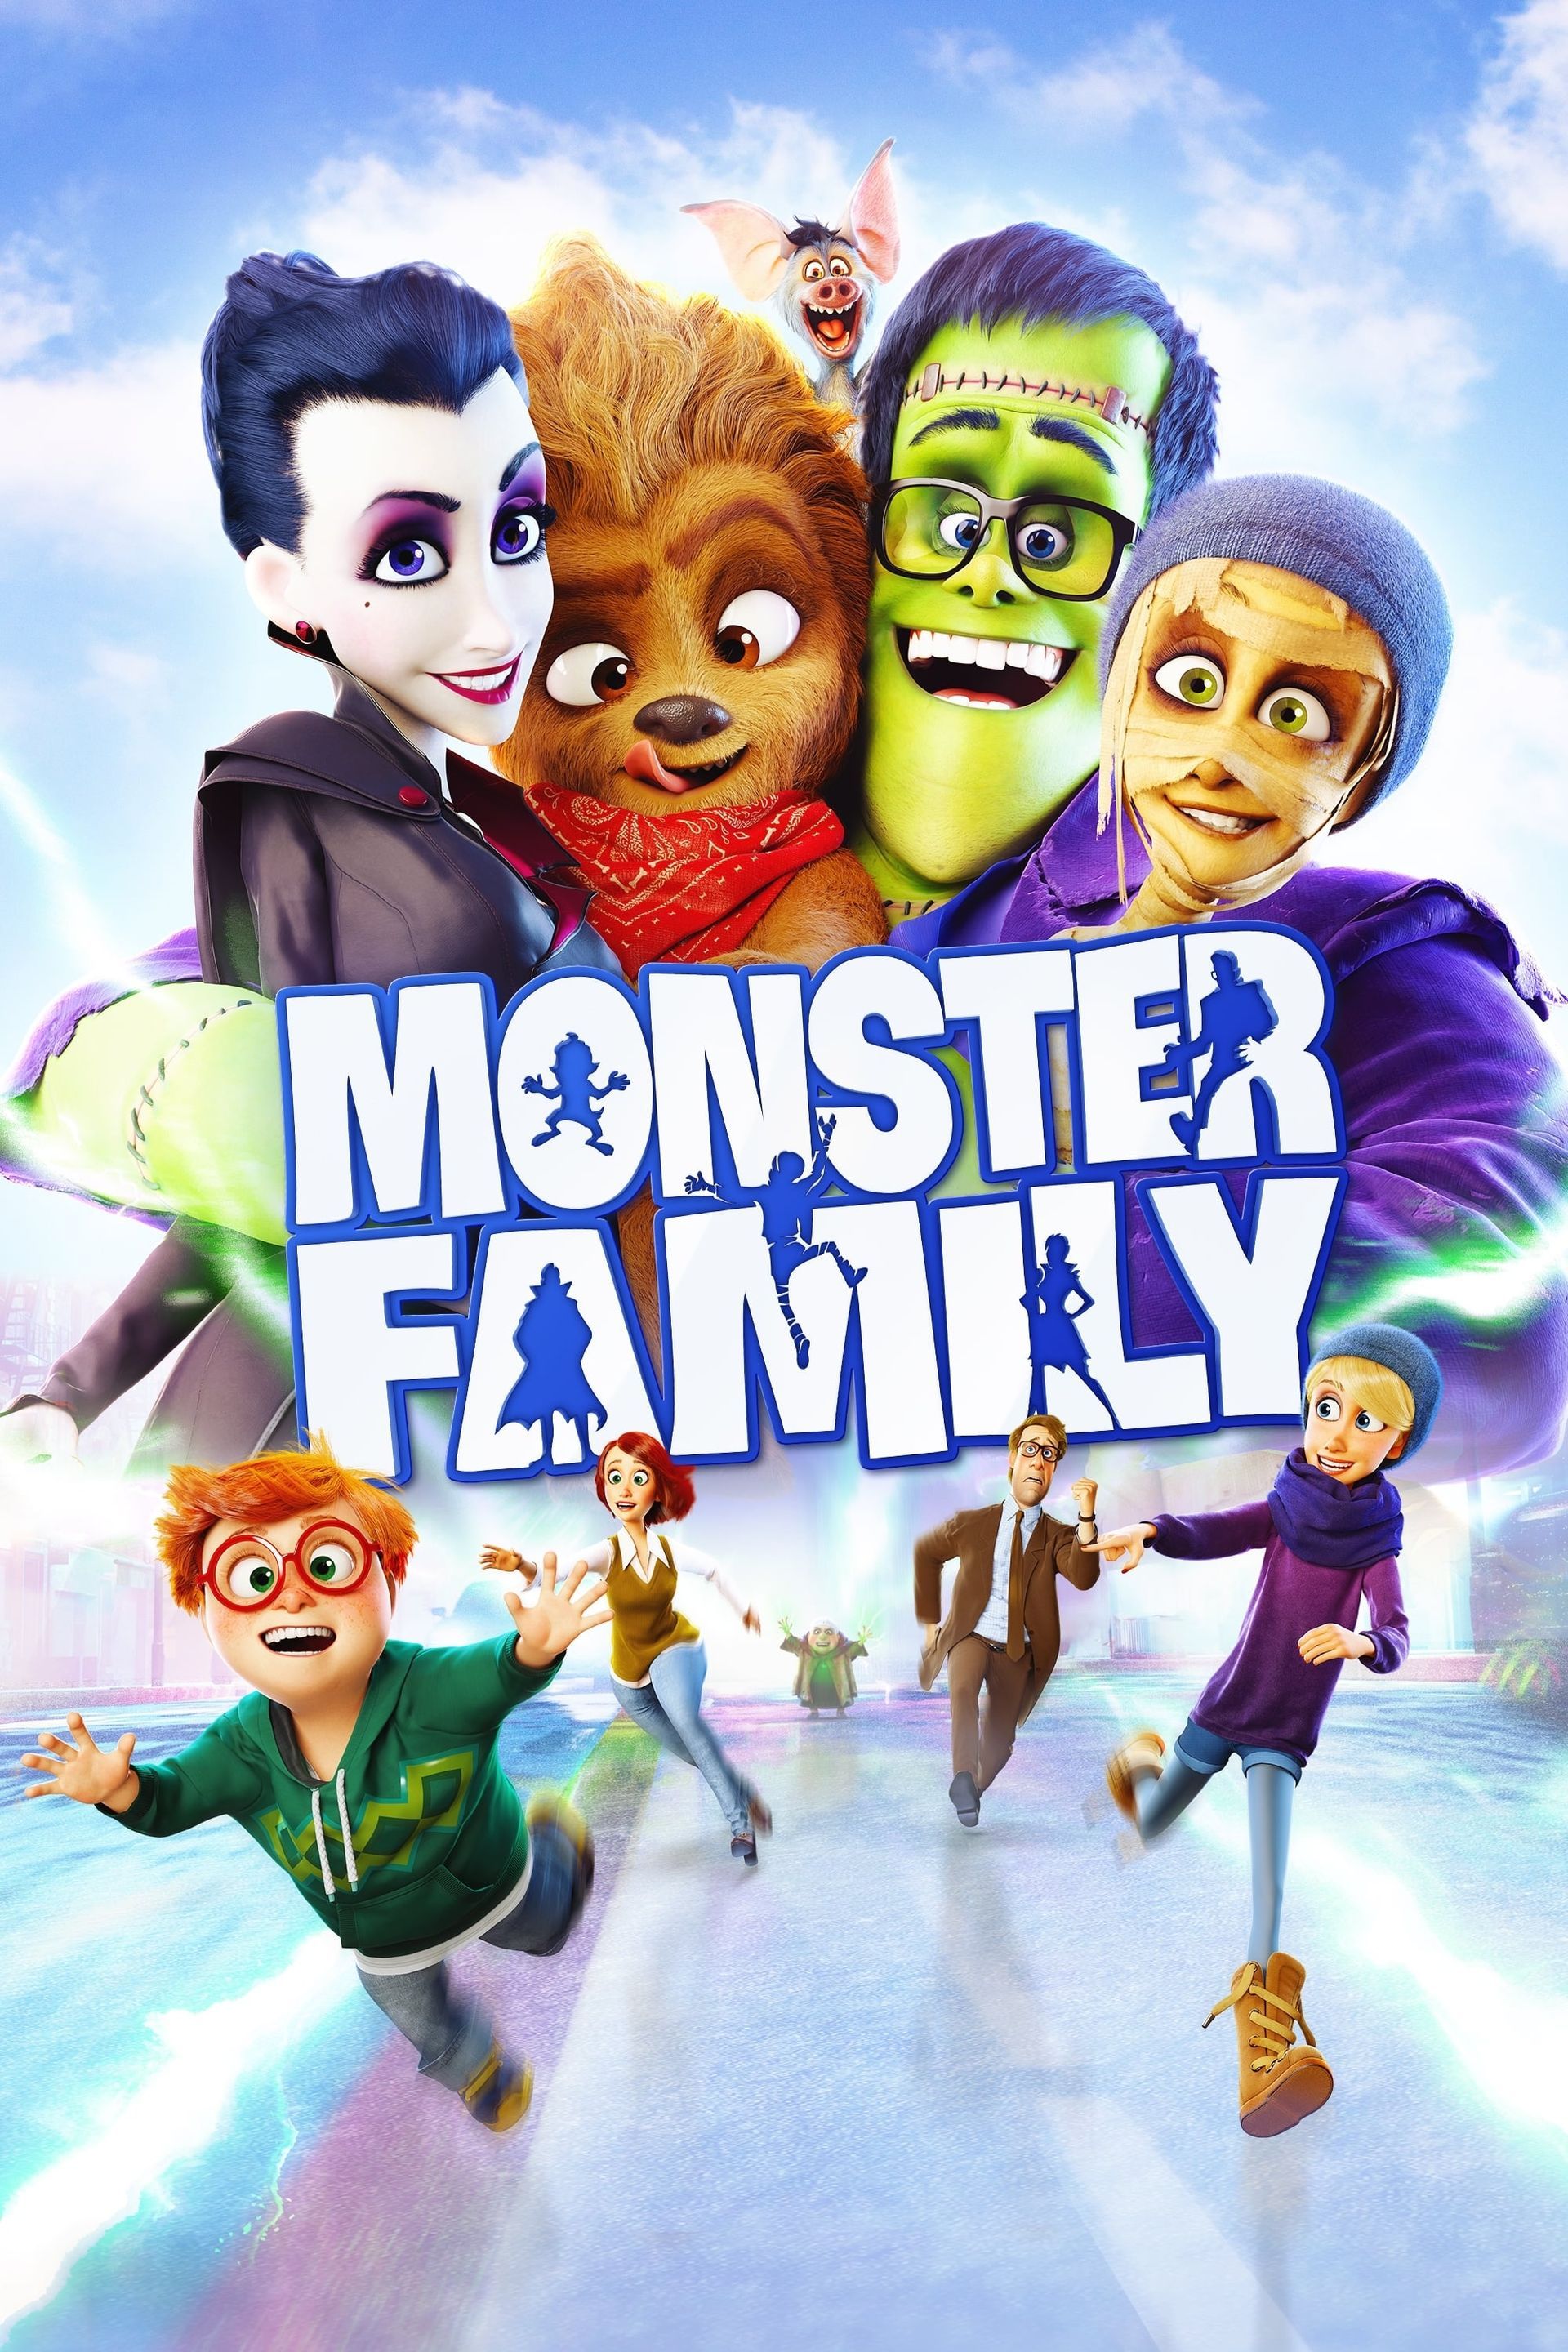 MONSTER FAMILY  Vampires, Witches & Monsters in new trailer for